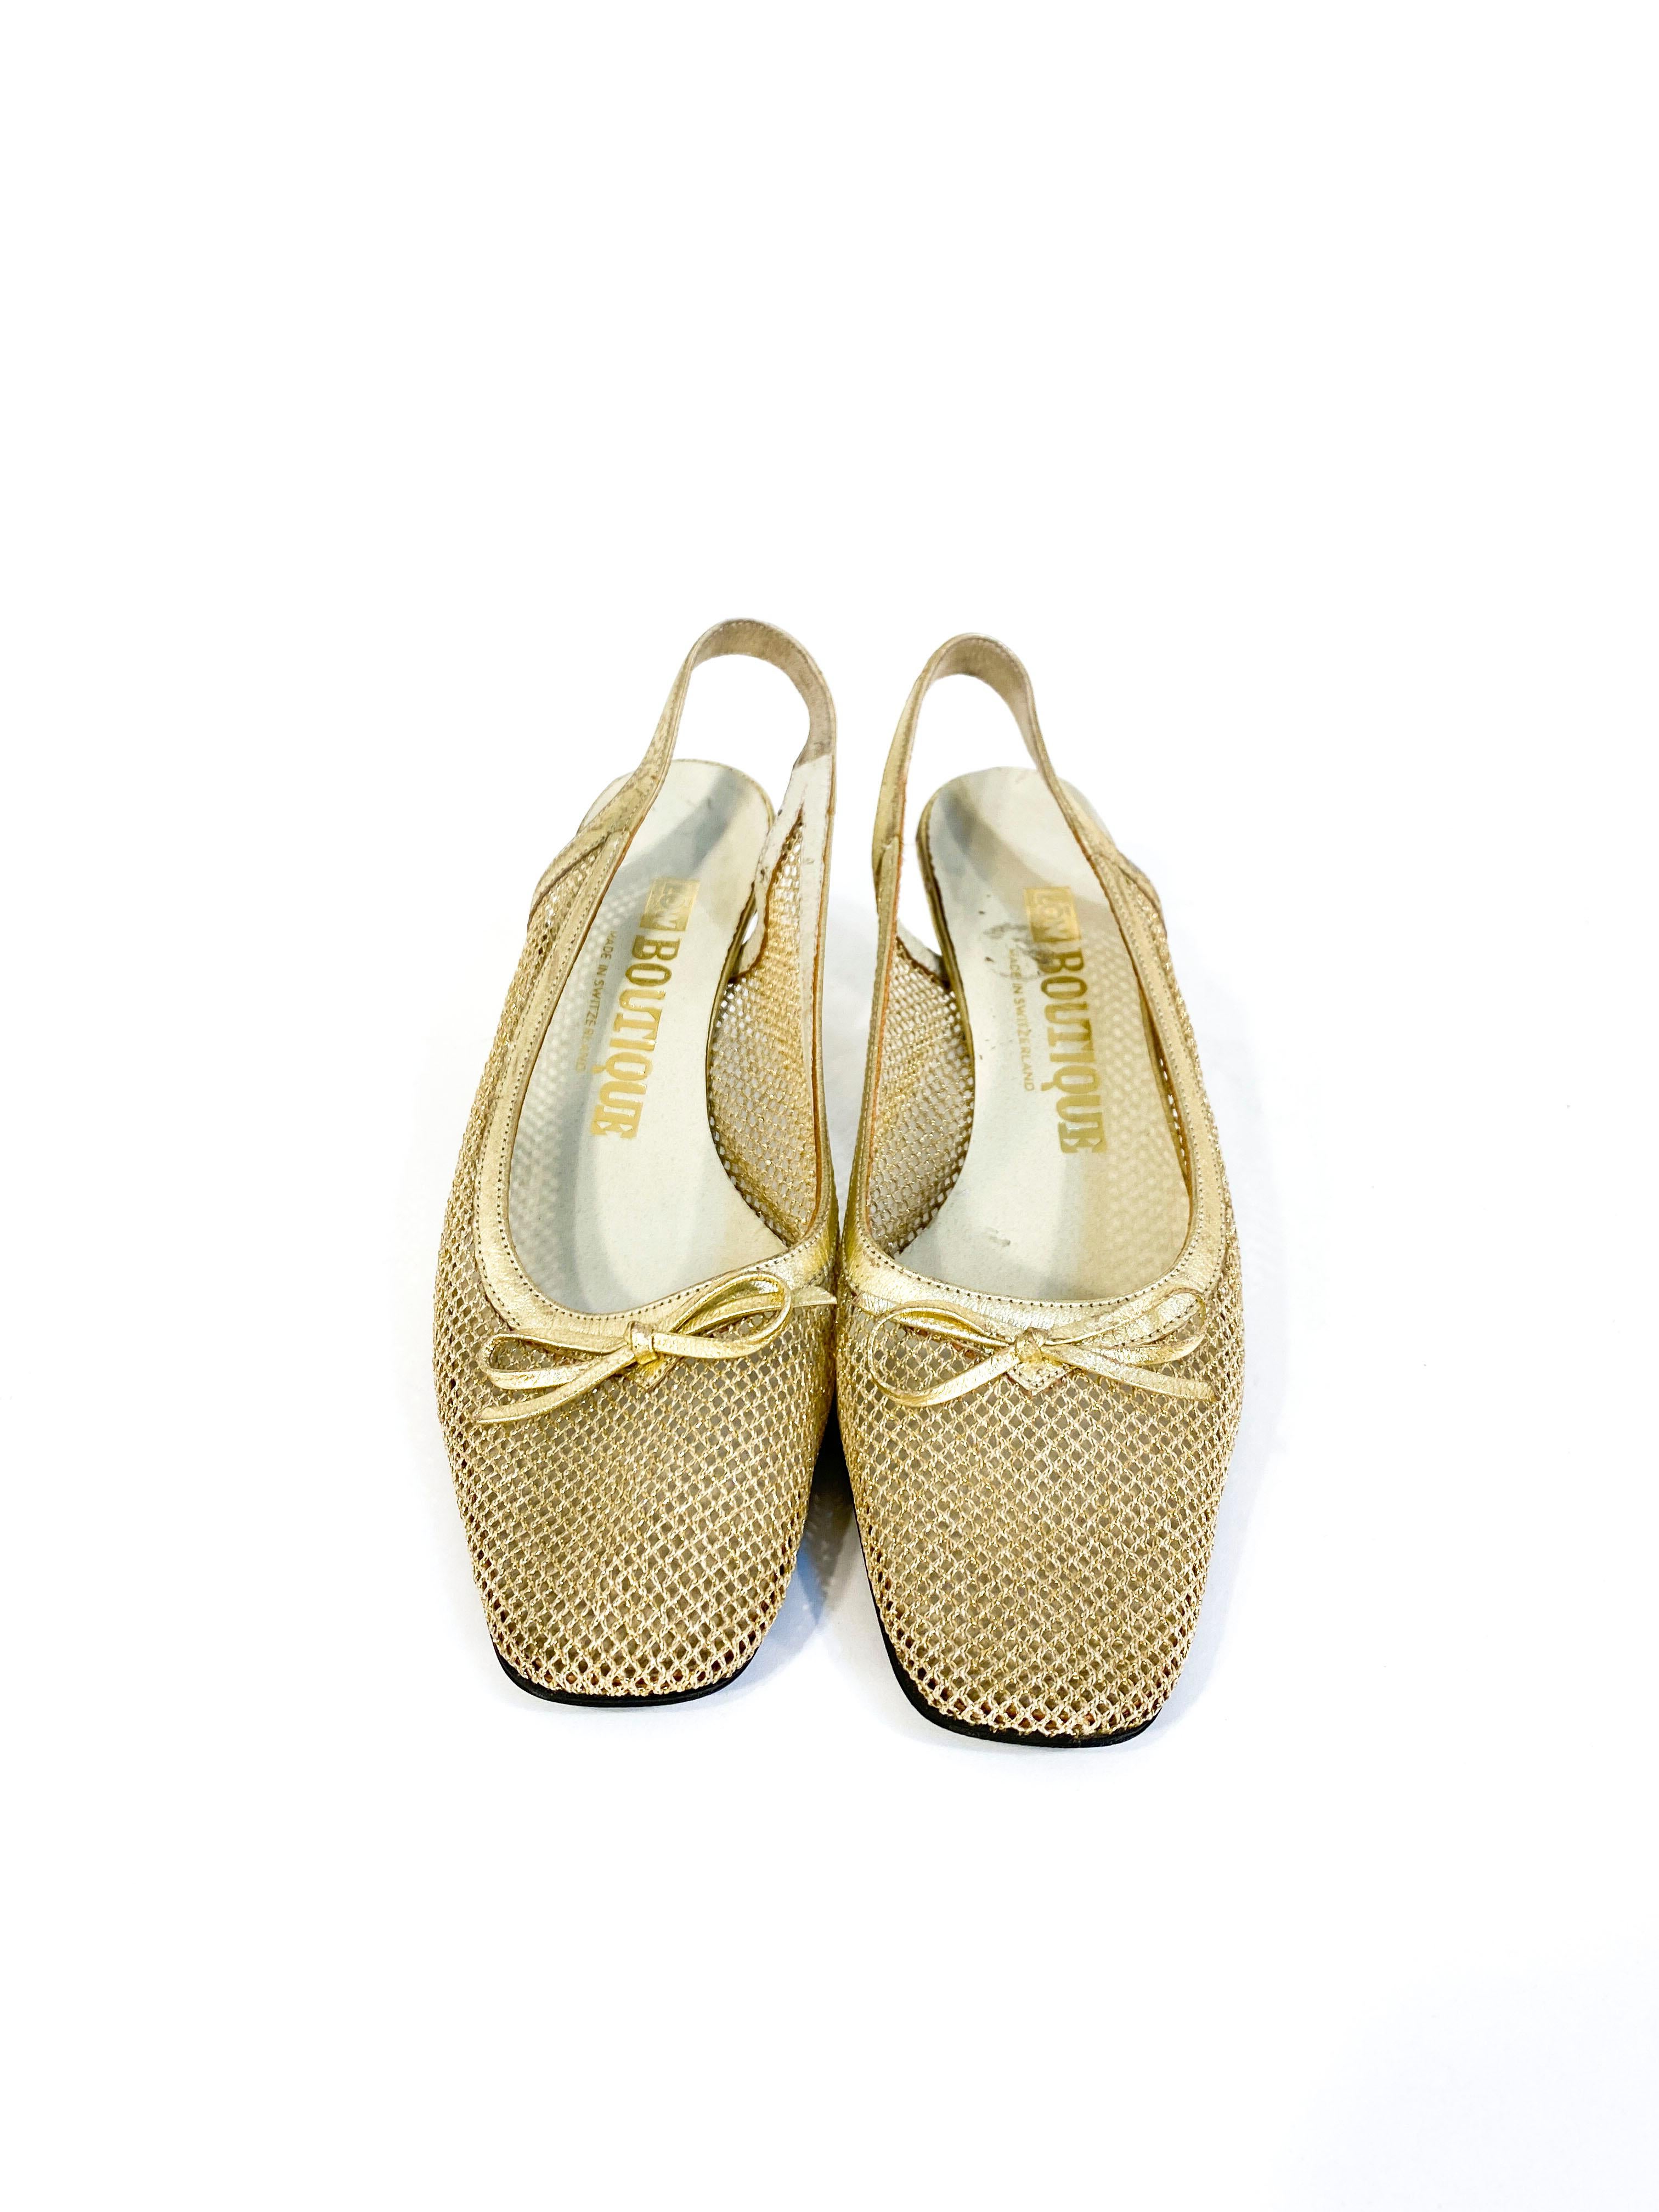 1970s gold metallic mesh heels trimed in gold leather. The toe is squared off to create a typical 70s shape and the vamp of the heels are decorated with a tied bow. The heels are 2.5 inches high.